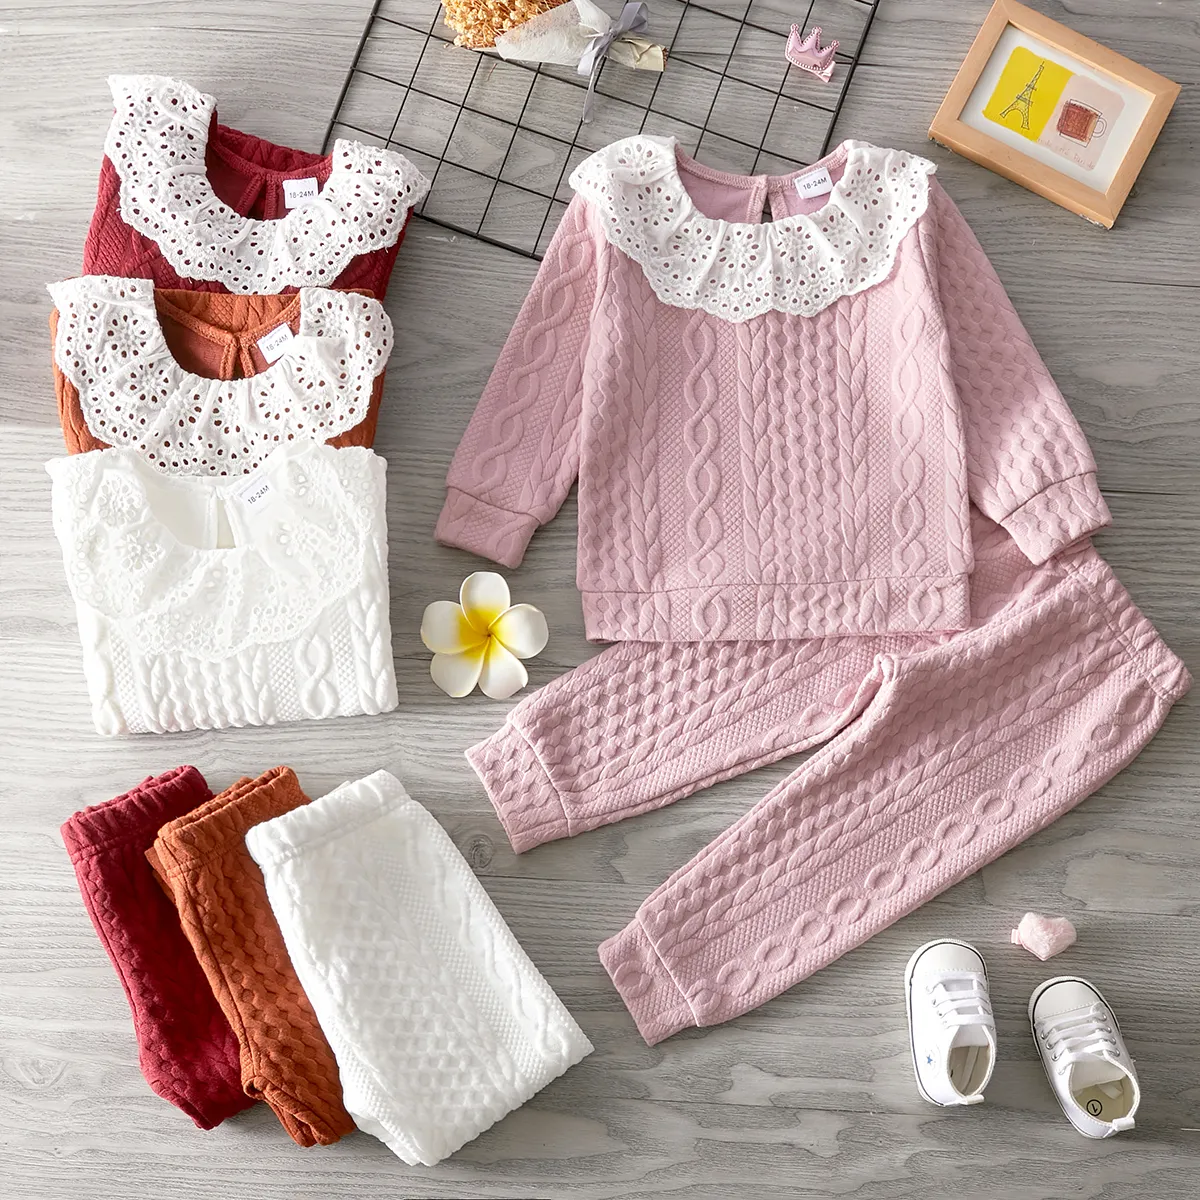 2-piece Toddler Girl Schiffy Flounce Cable Knit Sweater and Pants Set White big image 1